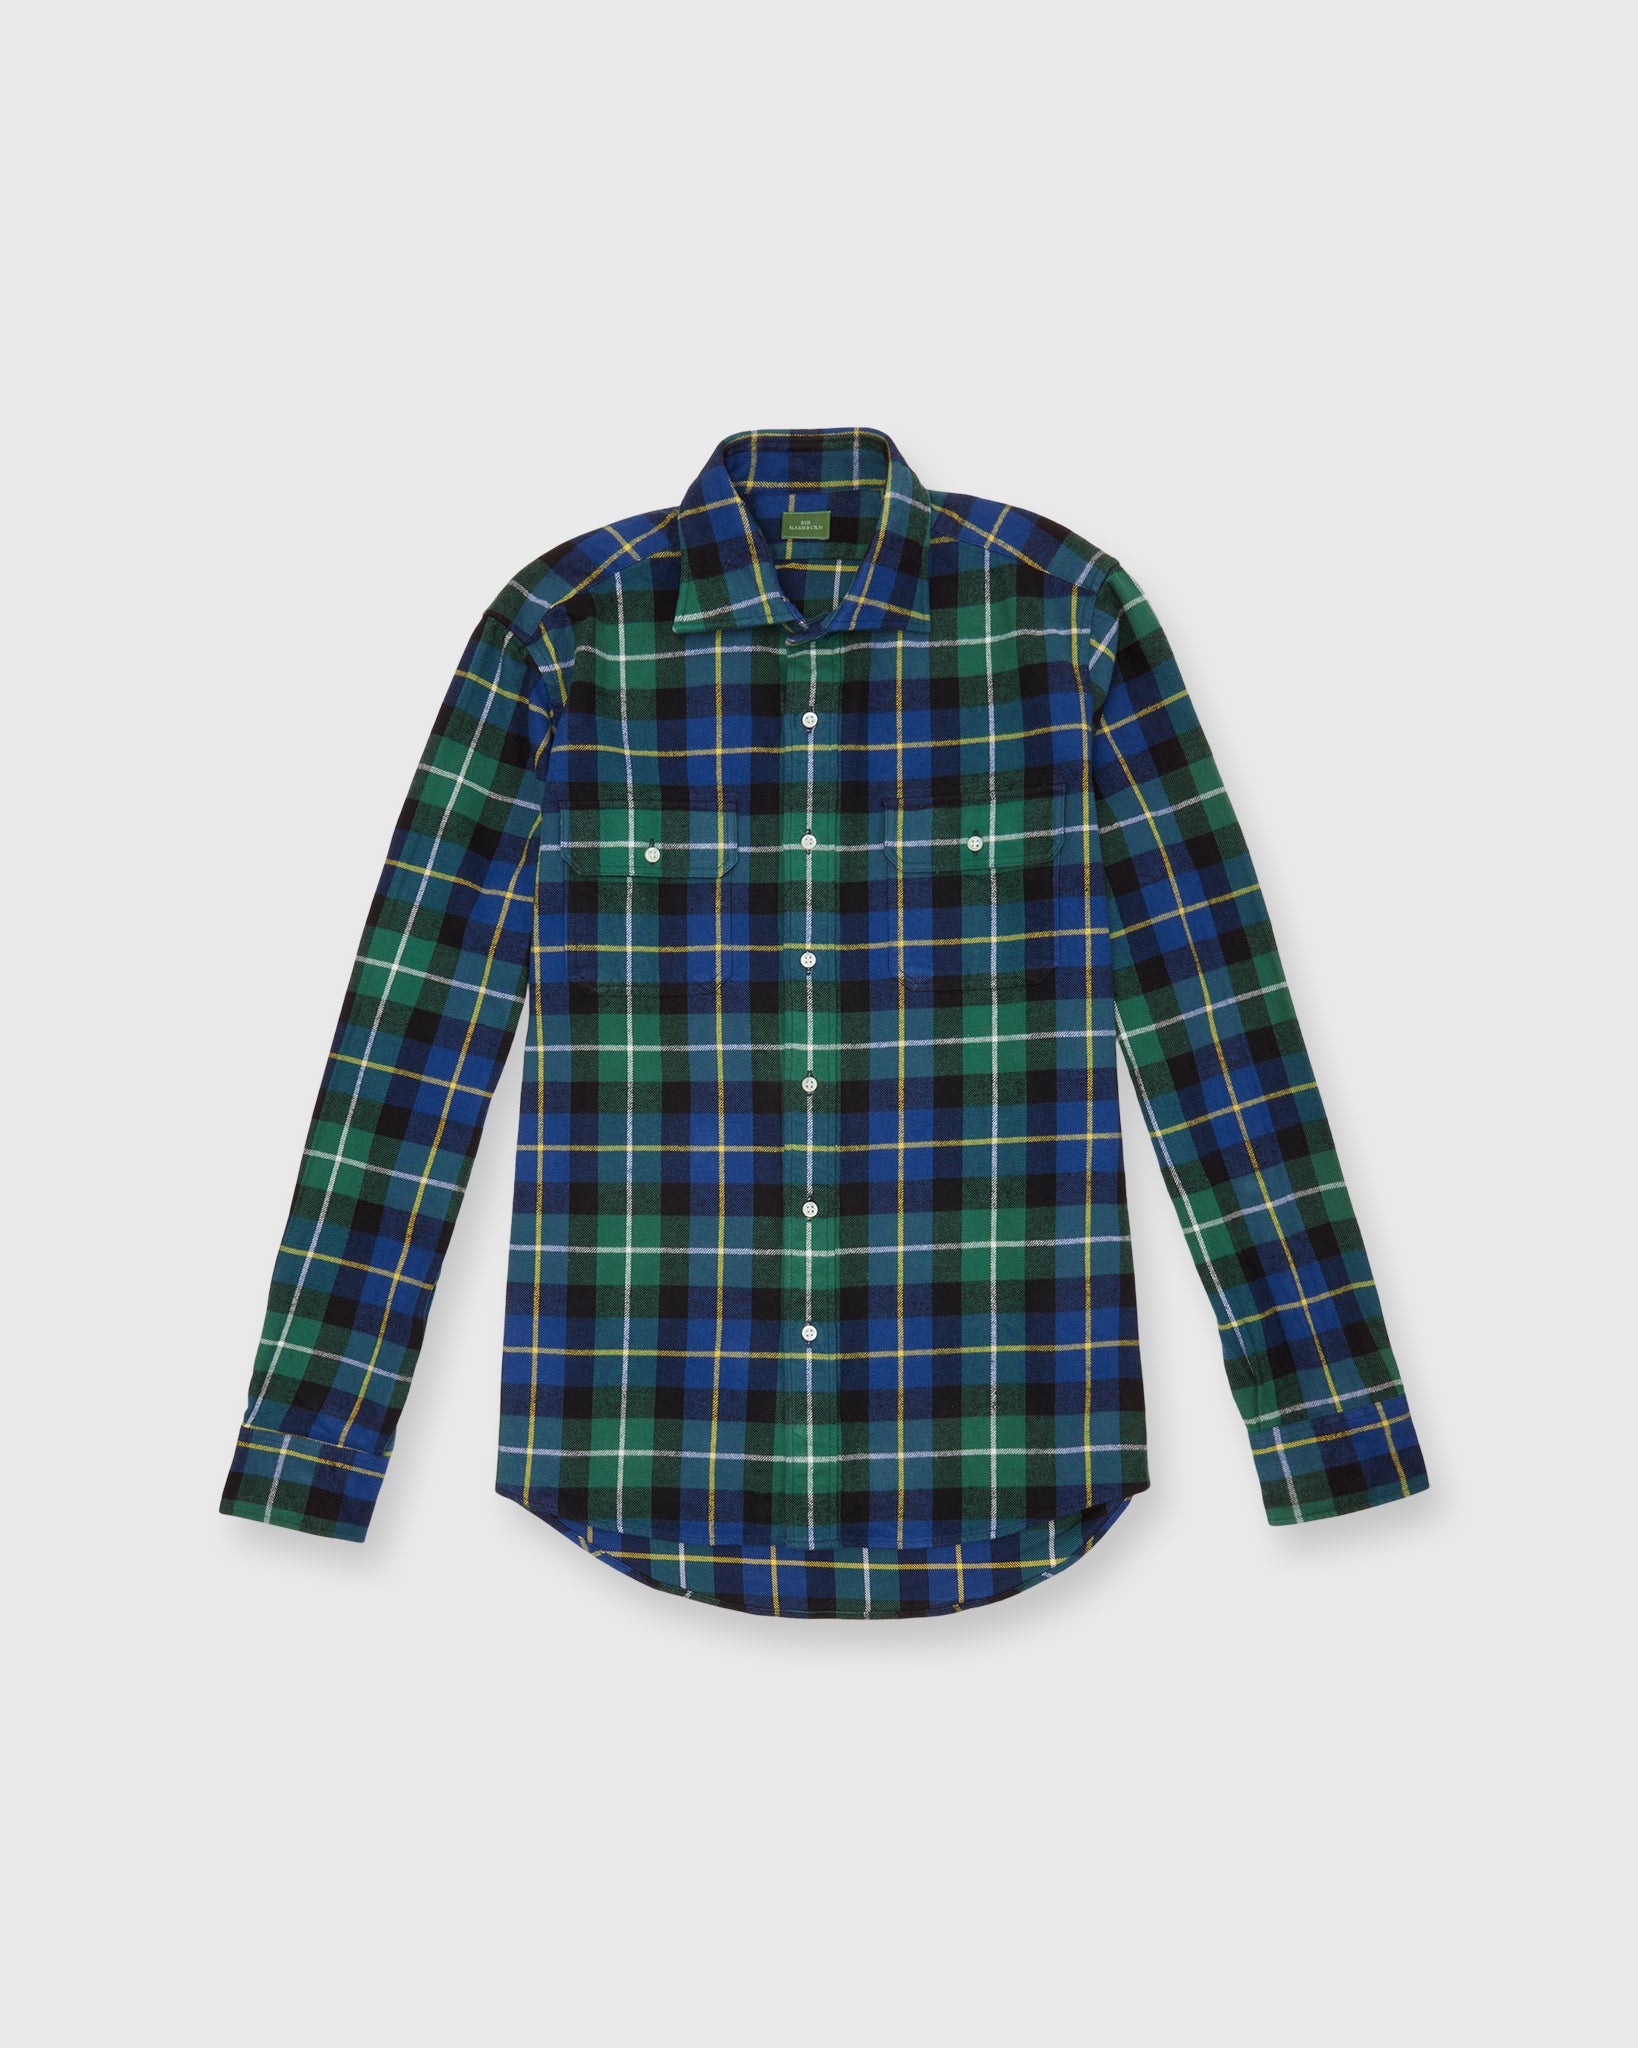 Work Shirt in Green/Blue/Yellow Plaid Brushed Twill